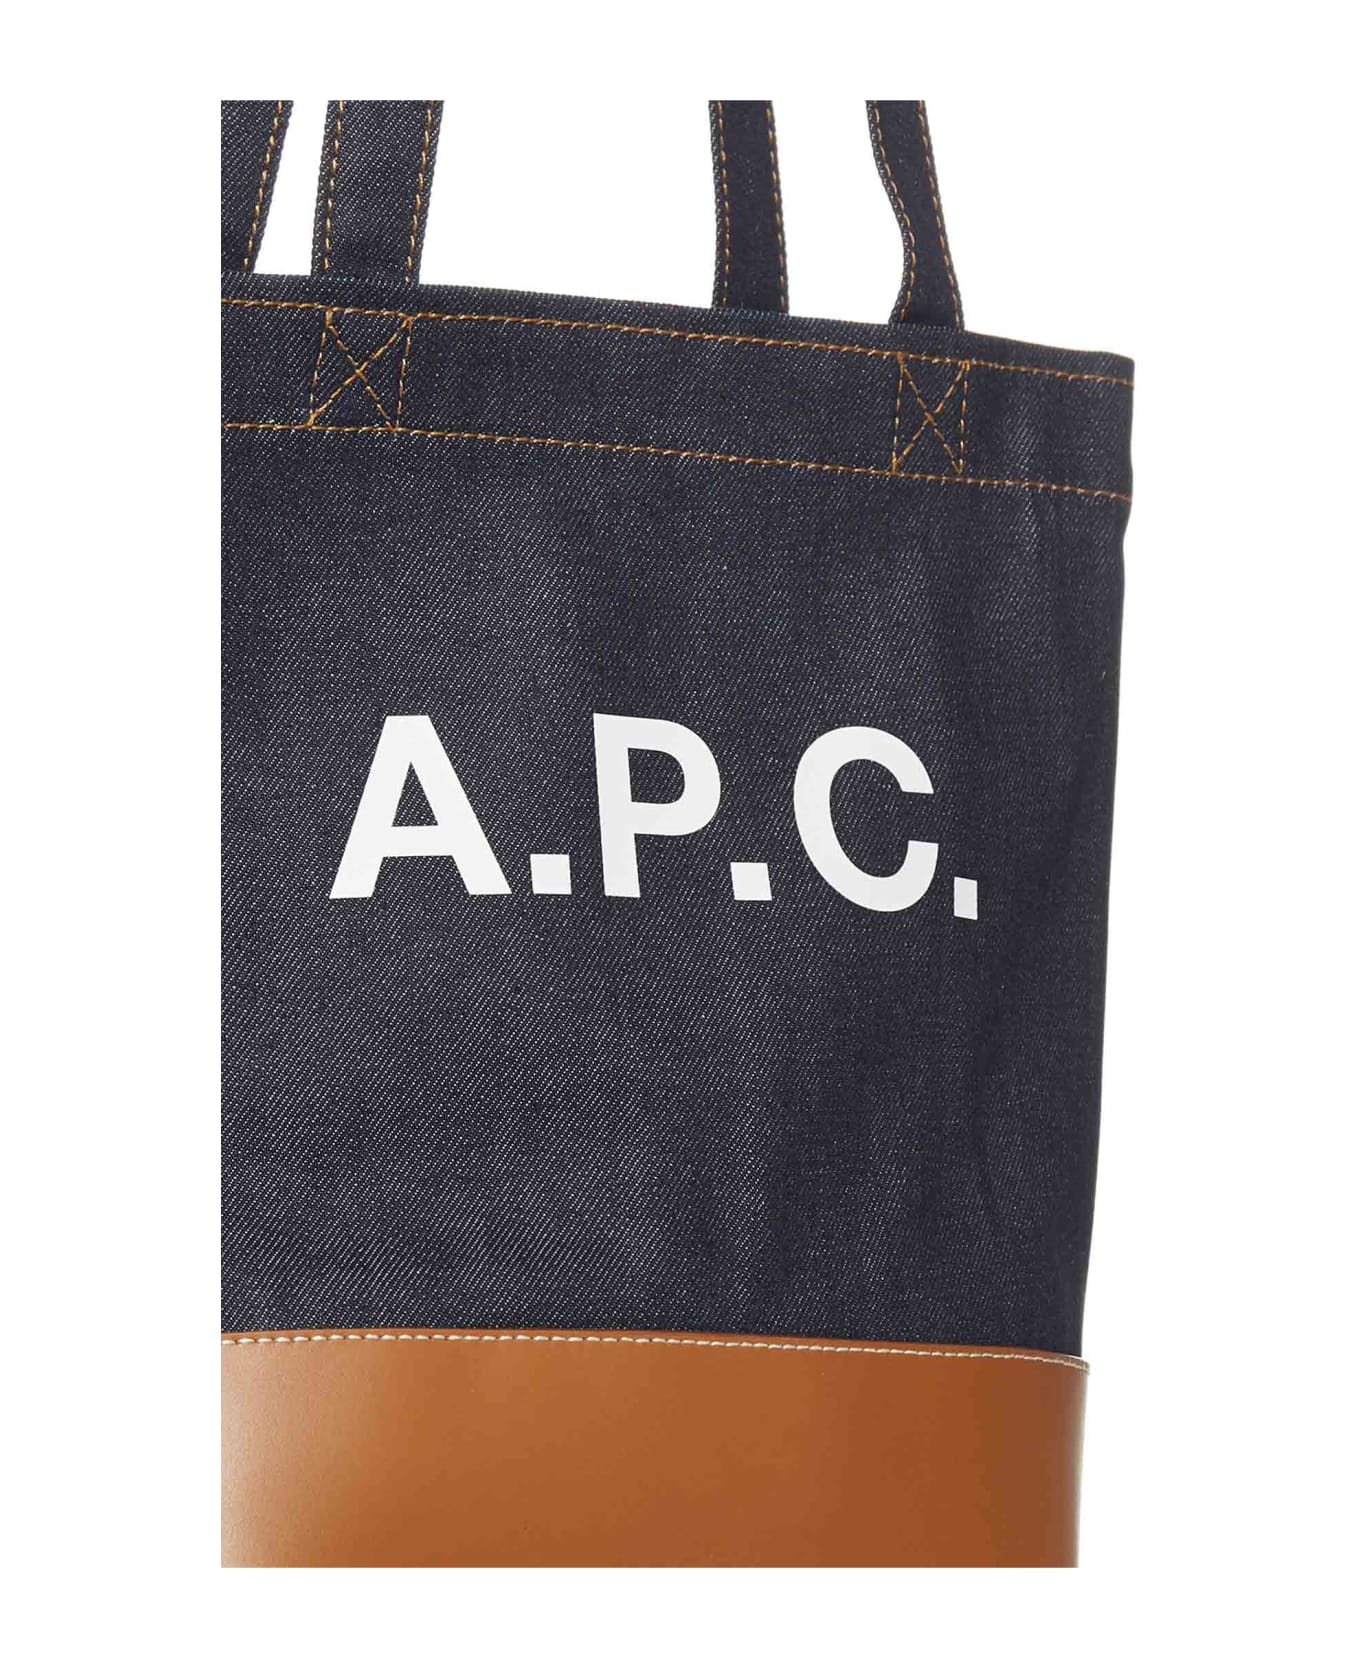 A.P.C. Axelle Small Tote Bag - Brown トートバッグ